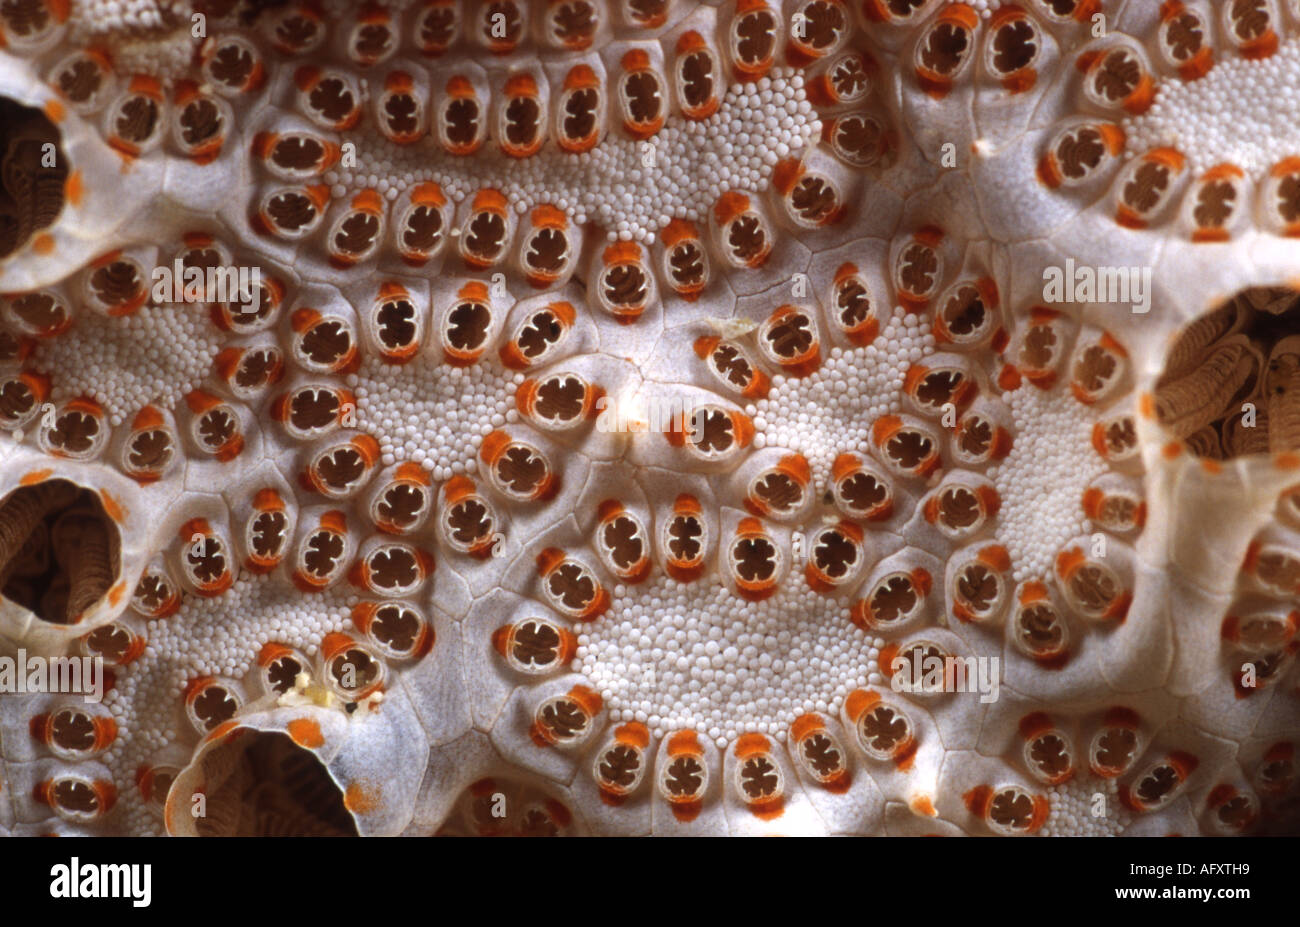 An abstract shot of a colony of Tunicates (Botryllus sp.). Stock Photo